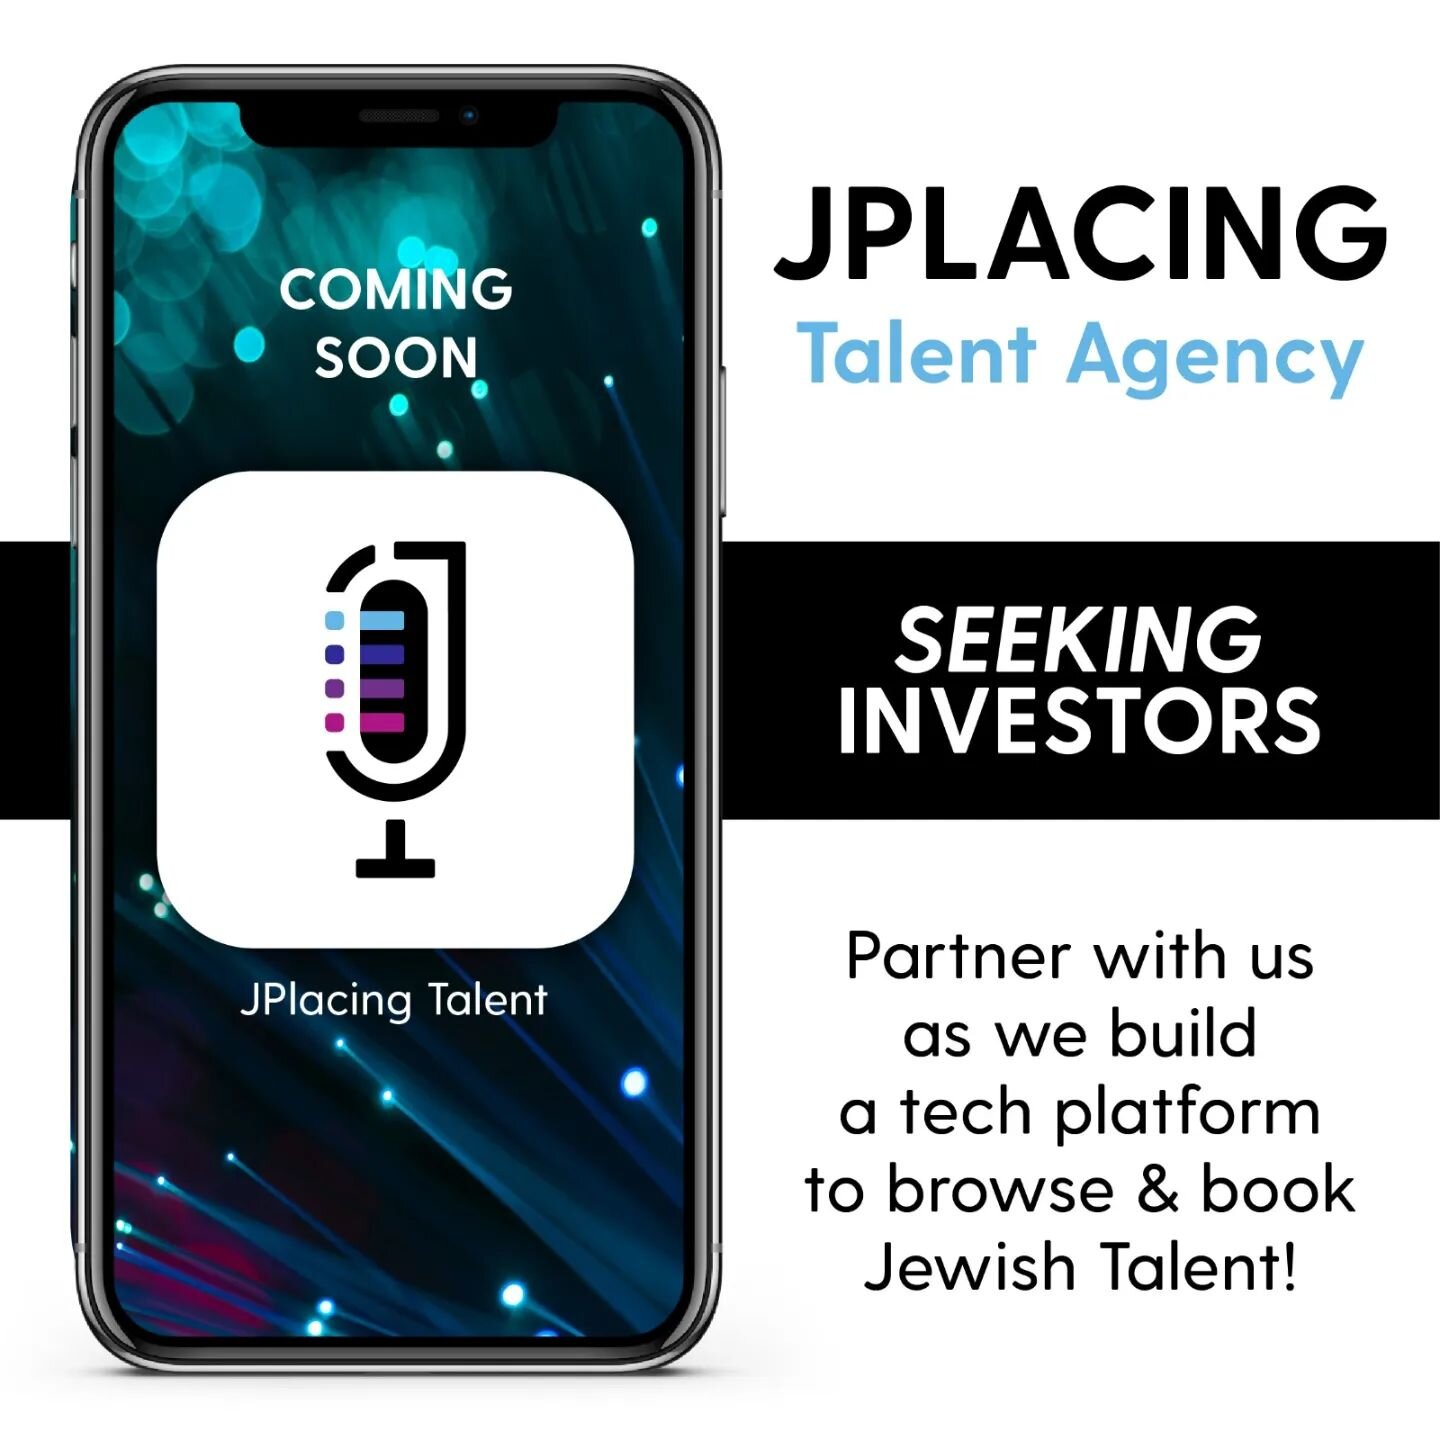 Do you want to be part of the next big thing? Get in touch about investment opportunities as we build out a tech platform to brower and book Jewish Talent. Call or message Shlomie at 347 634 9114